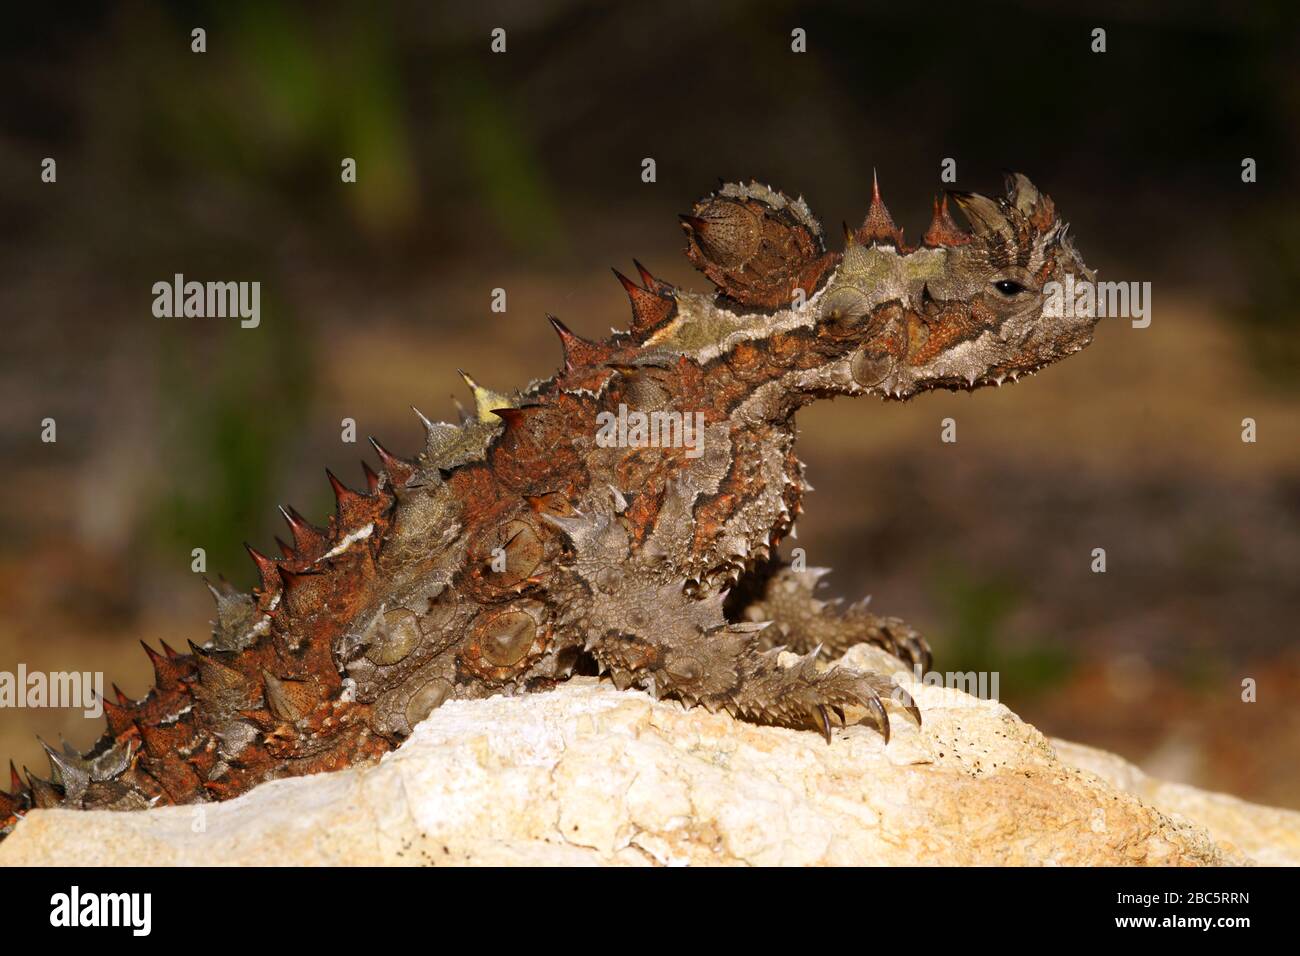 Thorny devil, Moloch horridus, ant-eating lizard in Western Australia, lateral view Stock Photo